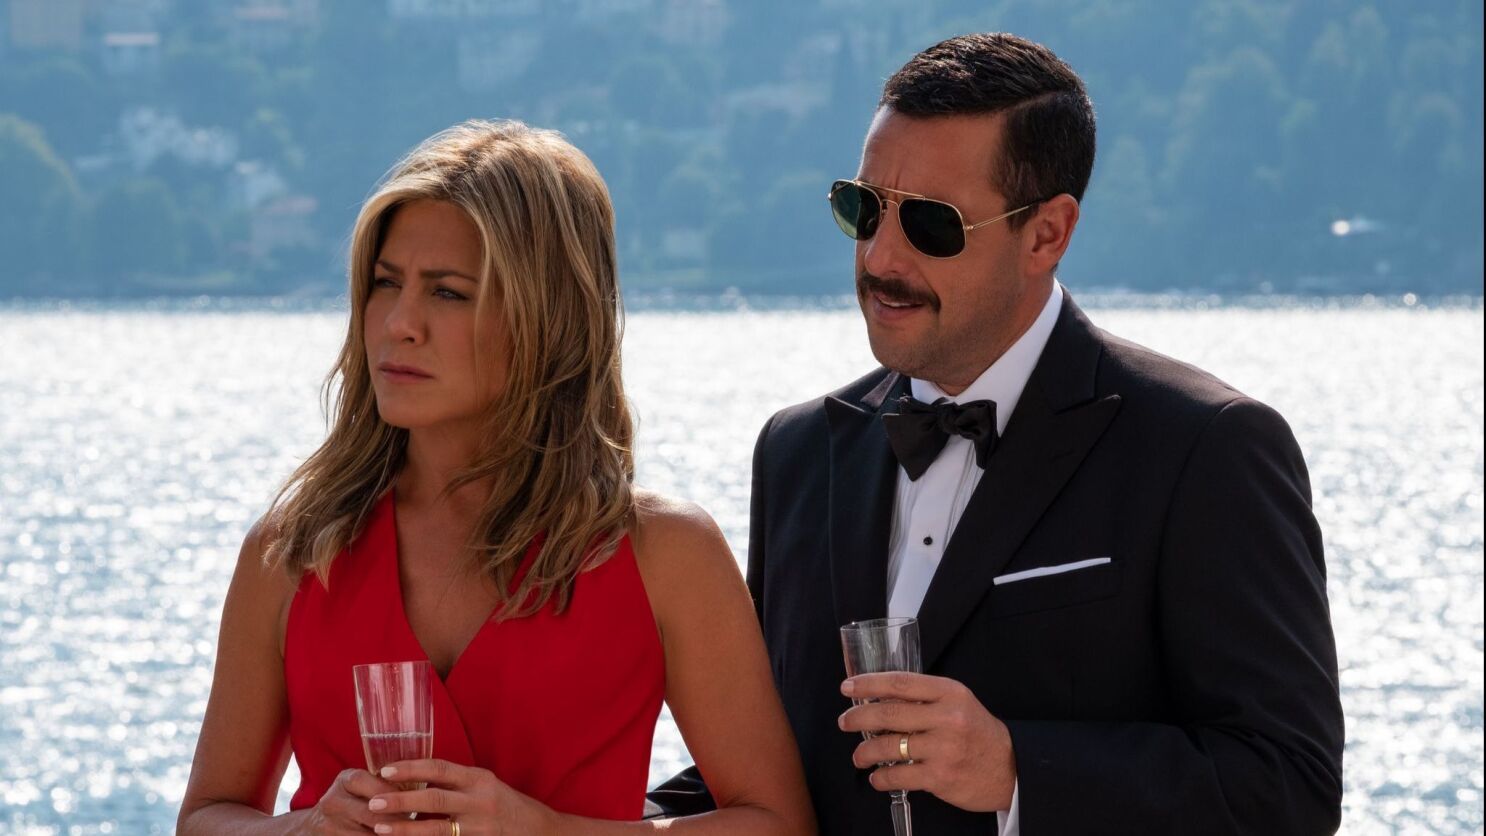 Netflix Says Murder Mystery Was Its Most Popular 2019 Release